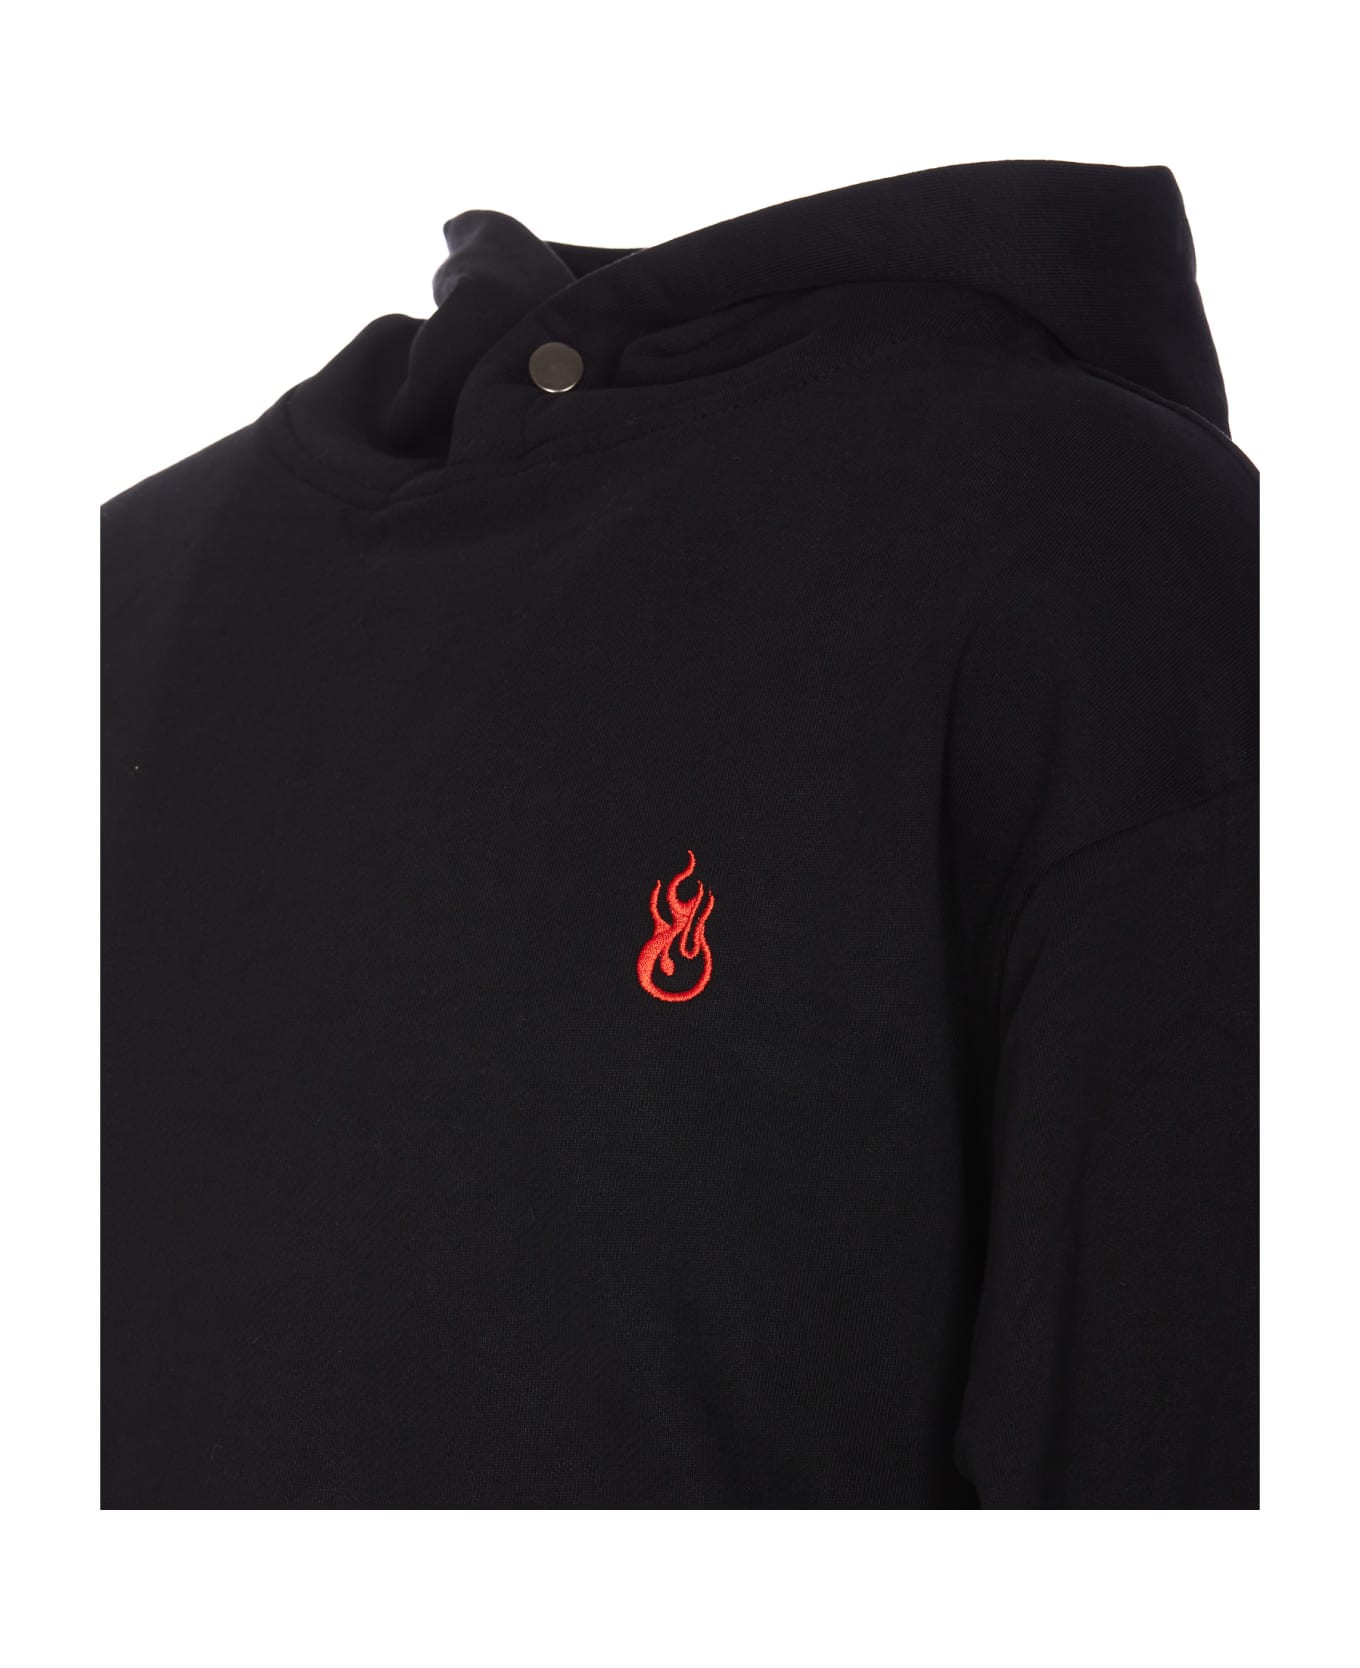 Vision of Super Hoodie With Flames Logo - Black フリース